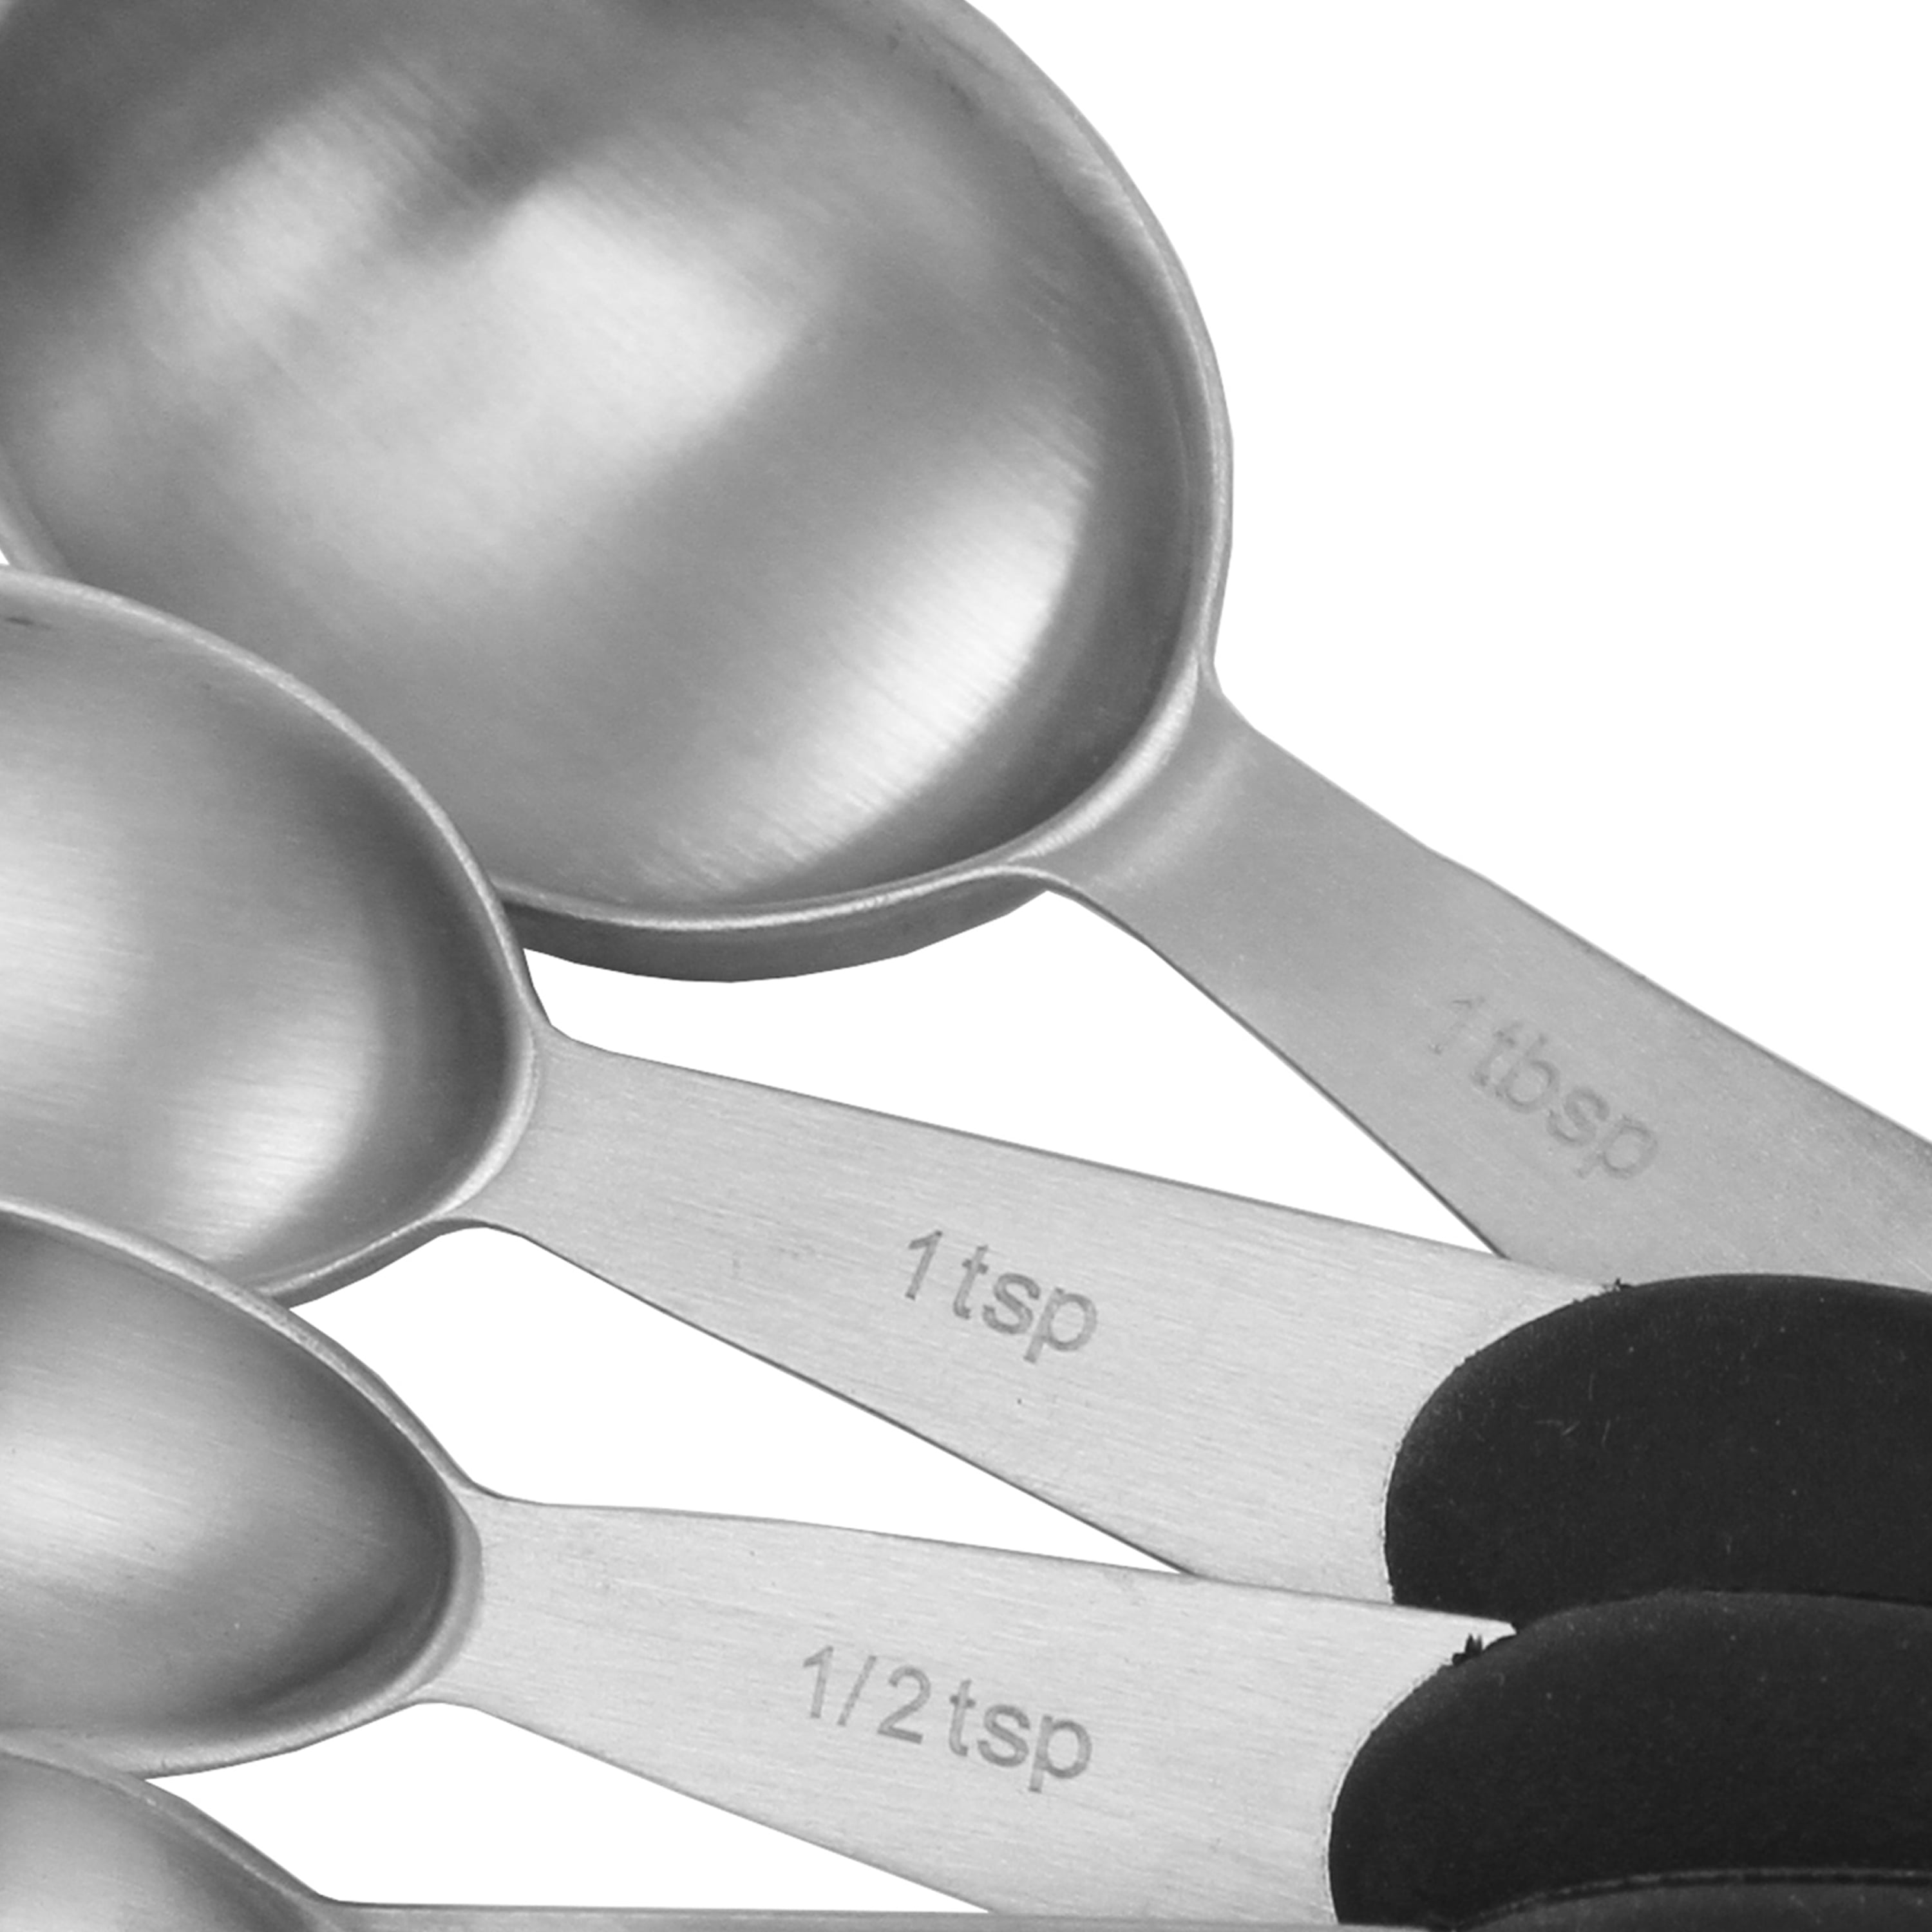 4pc All Clad Stainless Steel Measuring Spoon Set Standard 1 Tbsp 1, 1/2,  1/4 Tsp